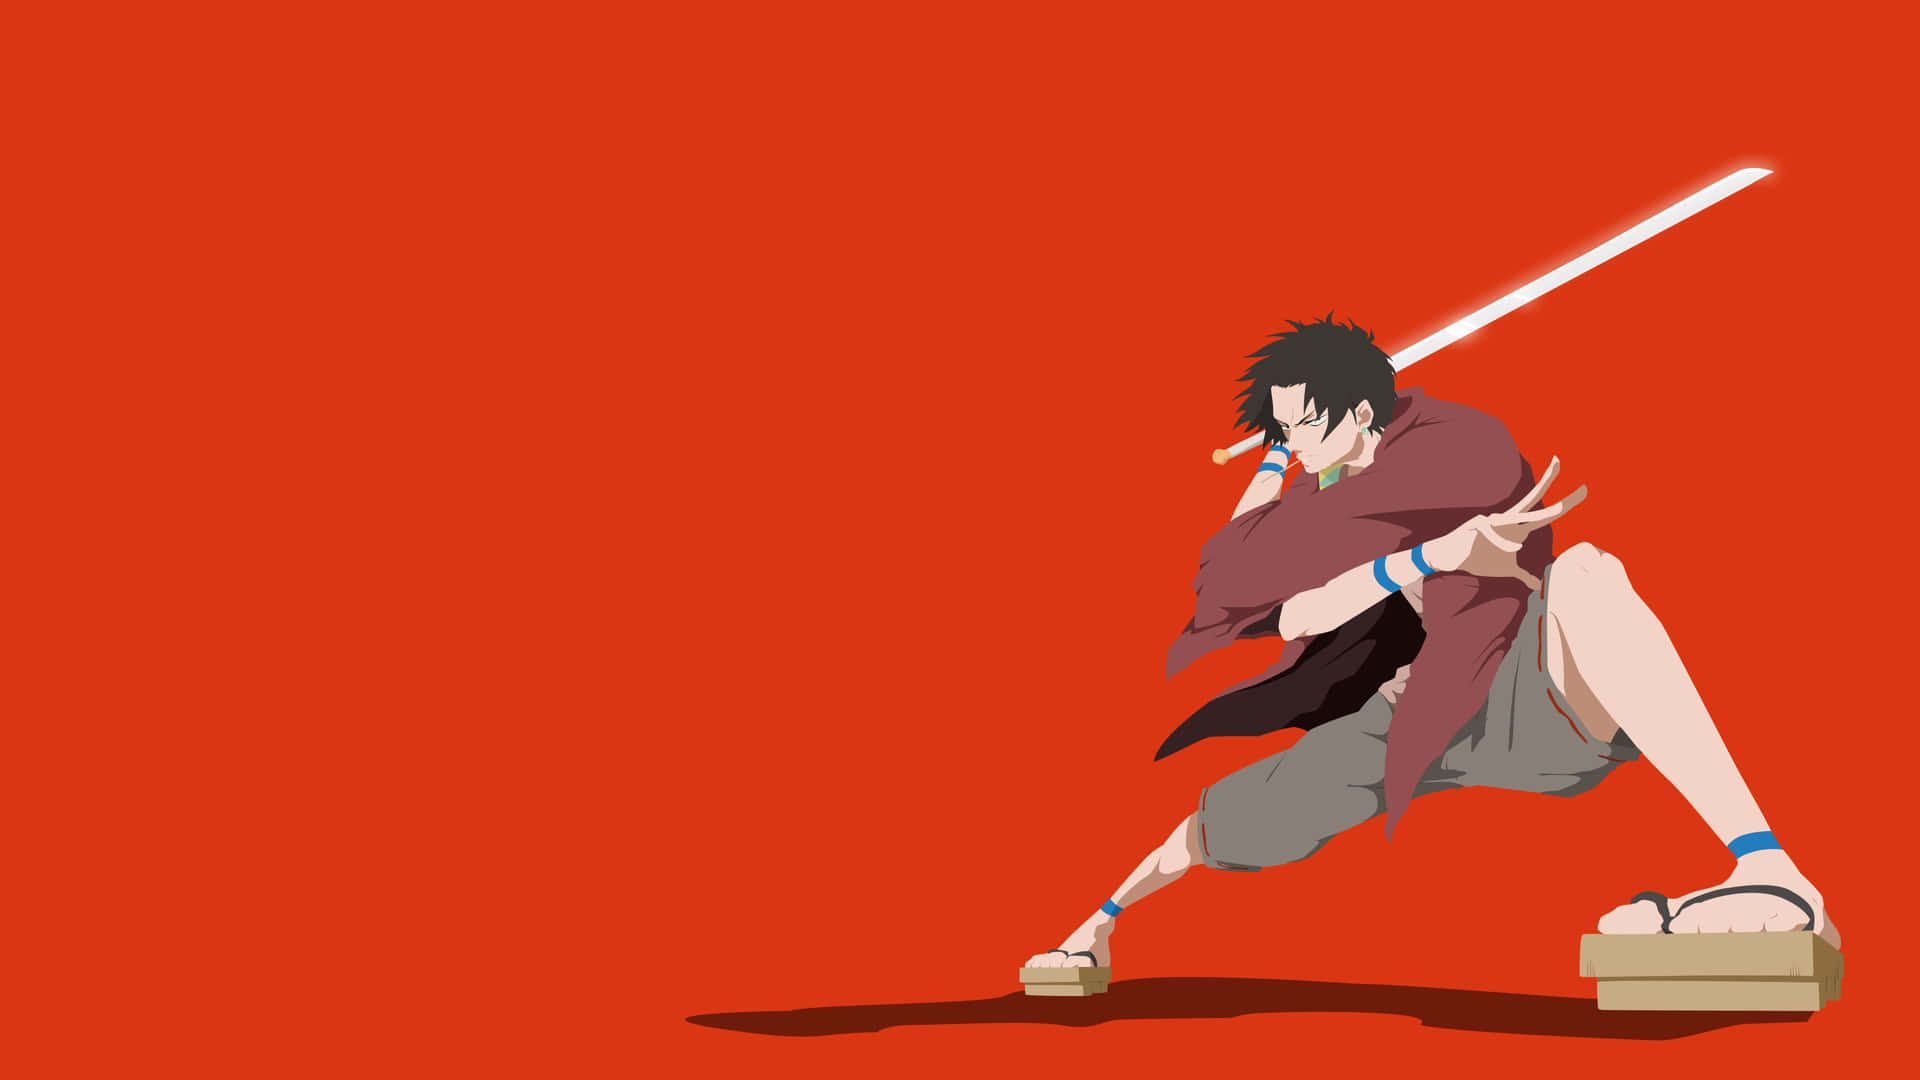 Best Anime Minimalist iPhone Wallpapers - Wallpaper Cave